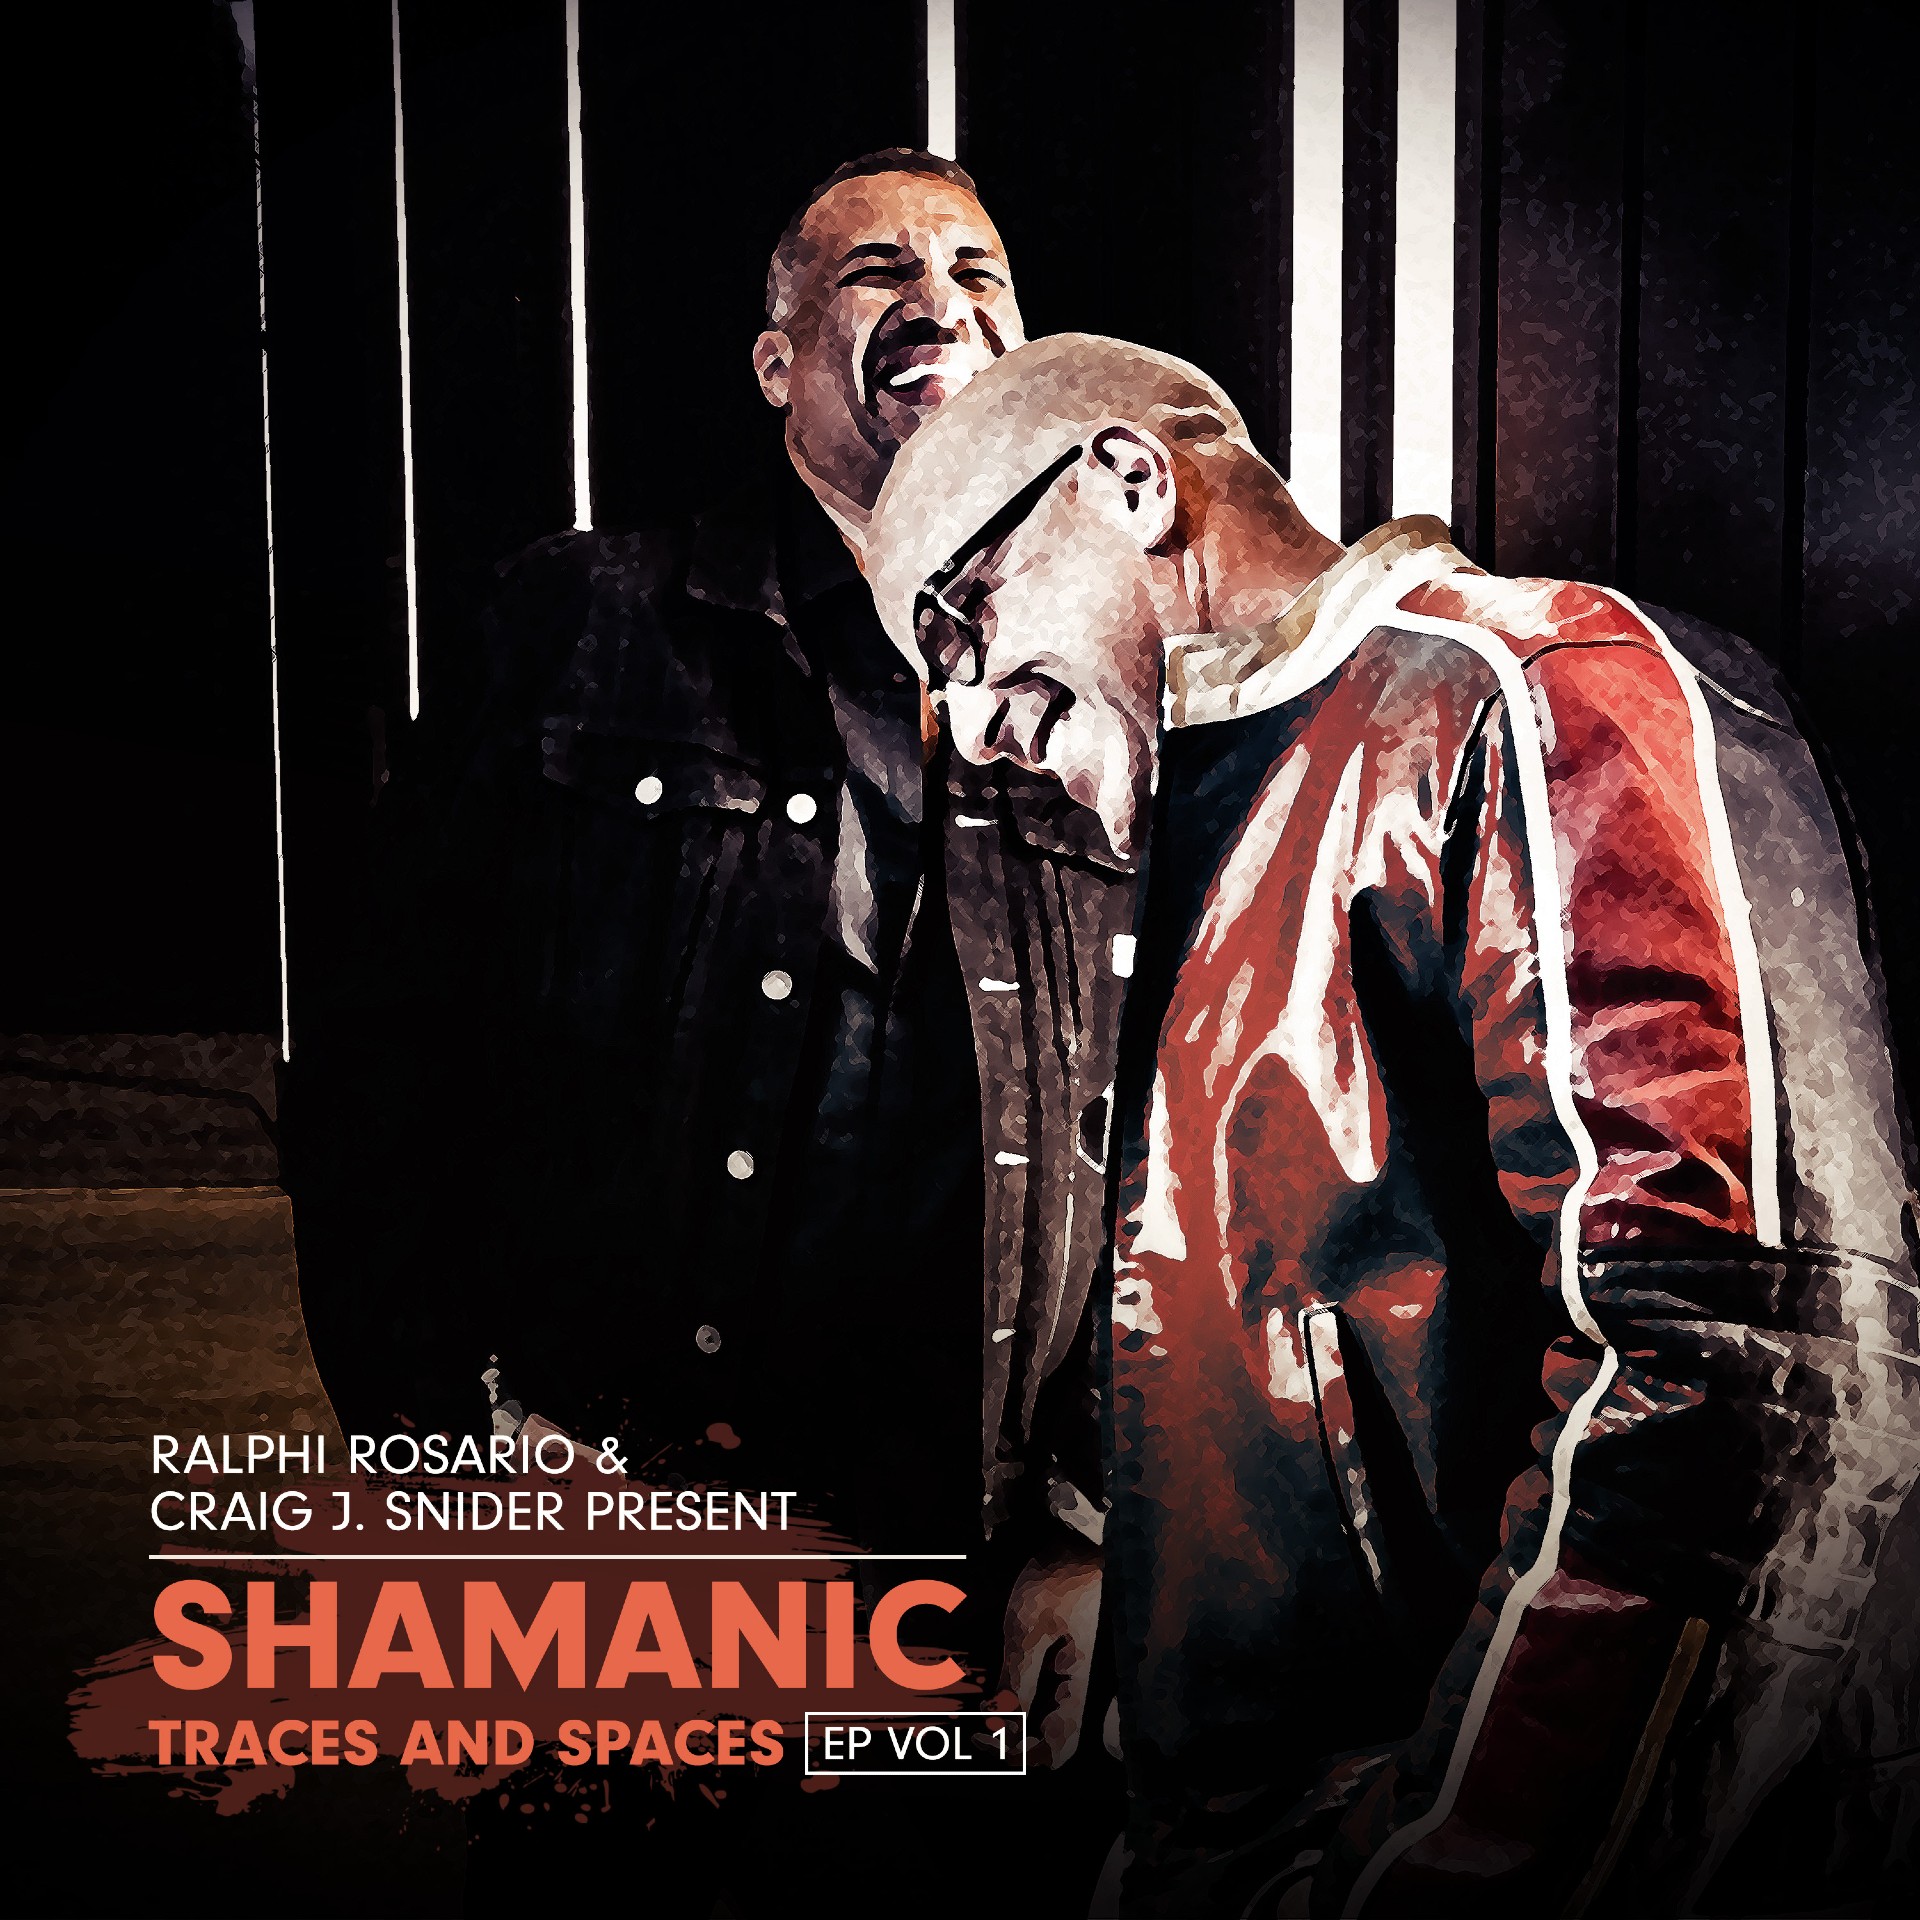 The Shamanic ‘Traces and Spaces, Vol. 1’ EP album artwork